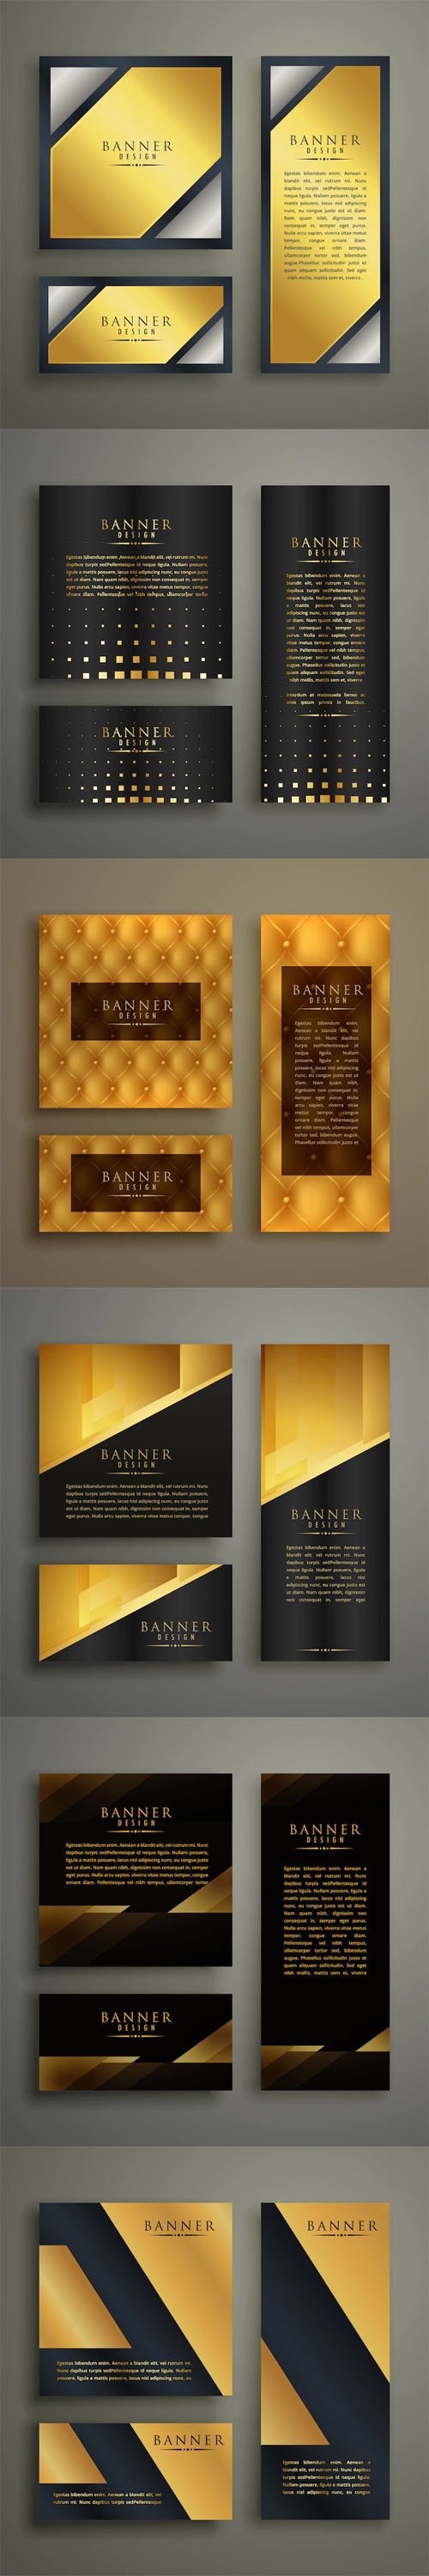 Luxury Banners - 30 Vector Banners Design Templates